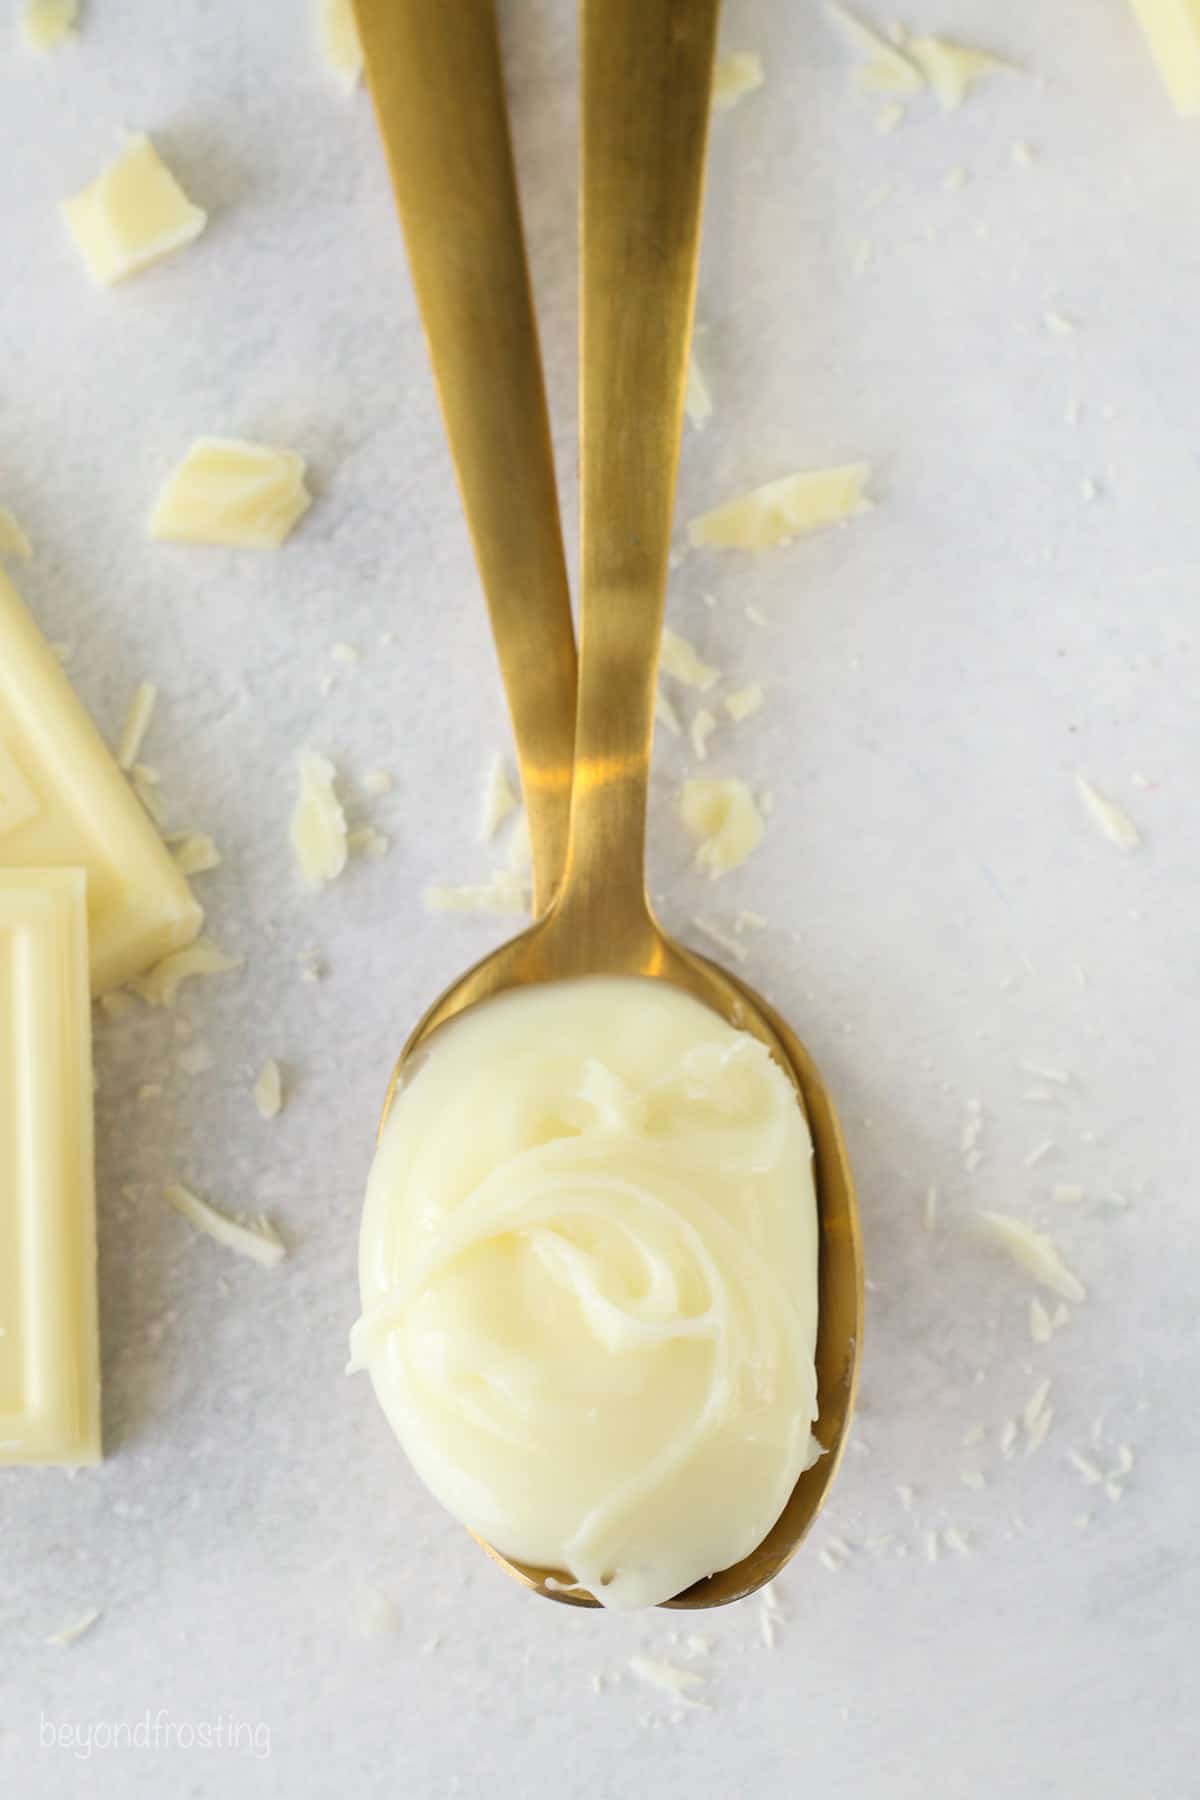 Overhead view of a spoonful of white chocolate ganache next to chopped white chocolate shavings.